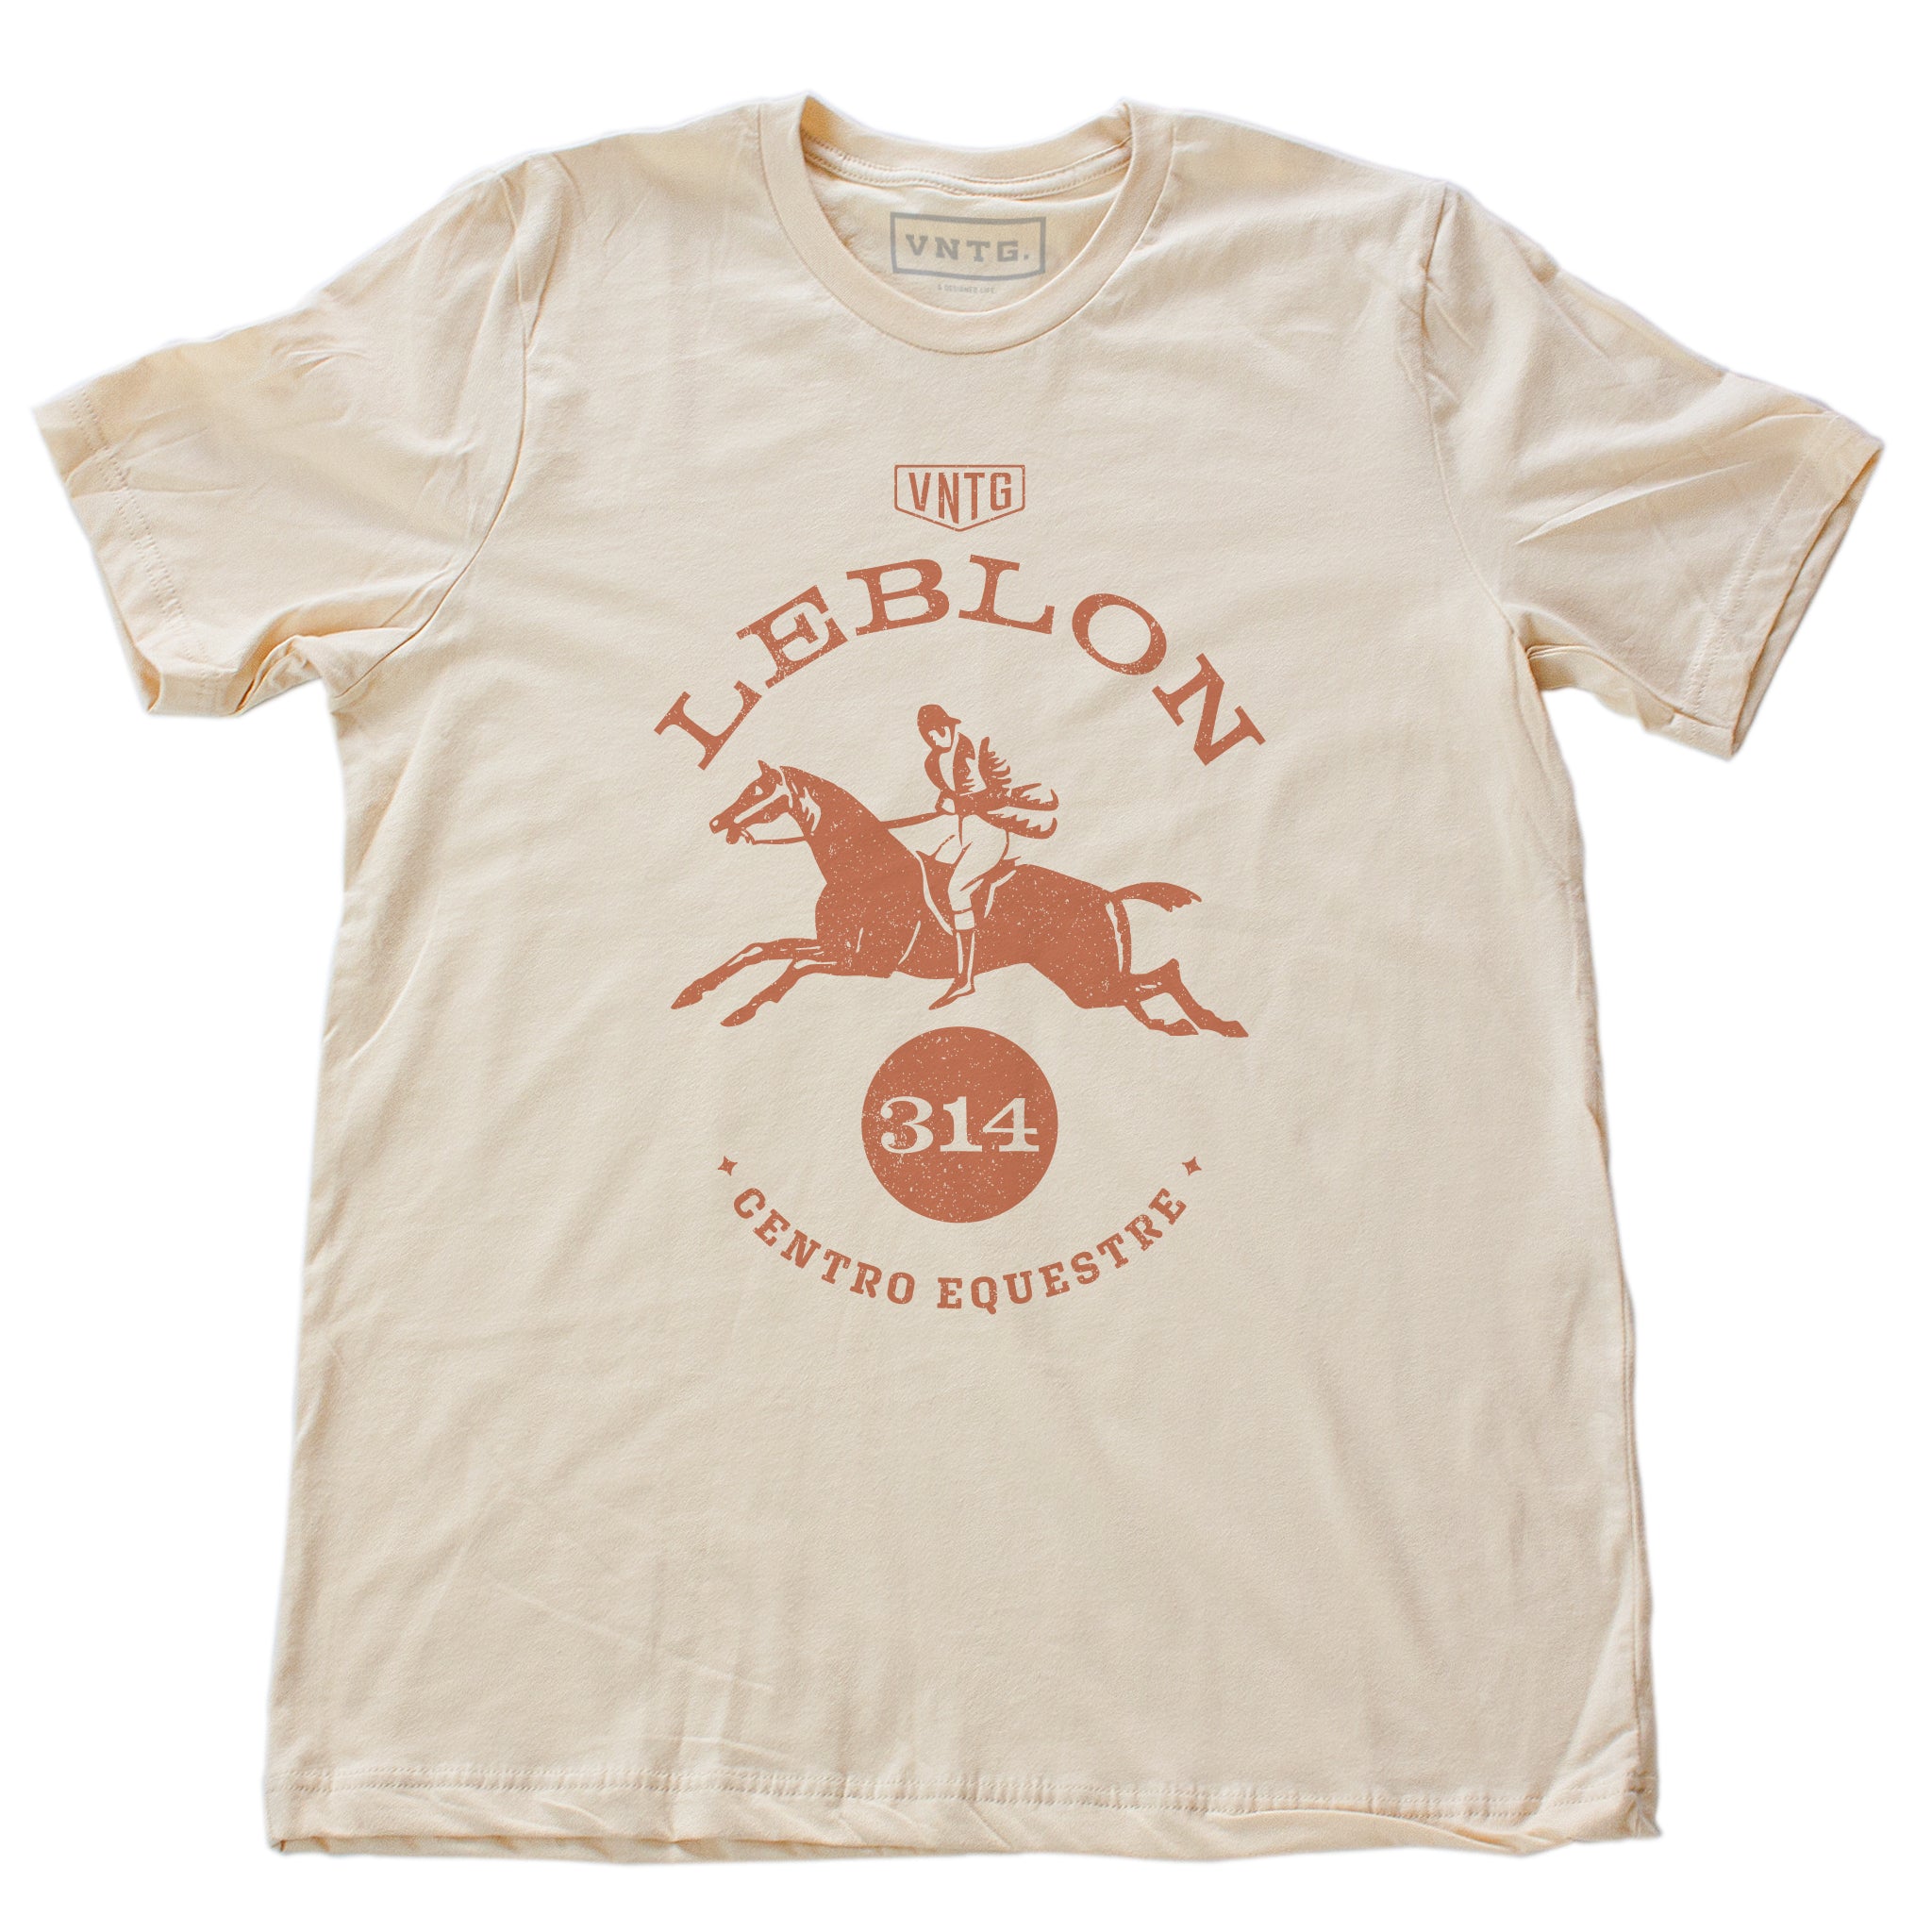 A preppy fashion retro, vintage-inspired t-shirt in Soft Cream, featuring a leaping horse in dressage competition, surrounded by the words “Leblon Centro Equestre” (Leblon Equestrian Center) a fictitious horse training and competition facility in Rio de Janeiro, Brazil. By fashion brand VNTG., for wolfsaint.net